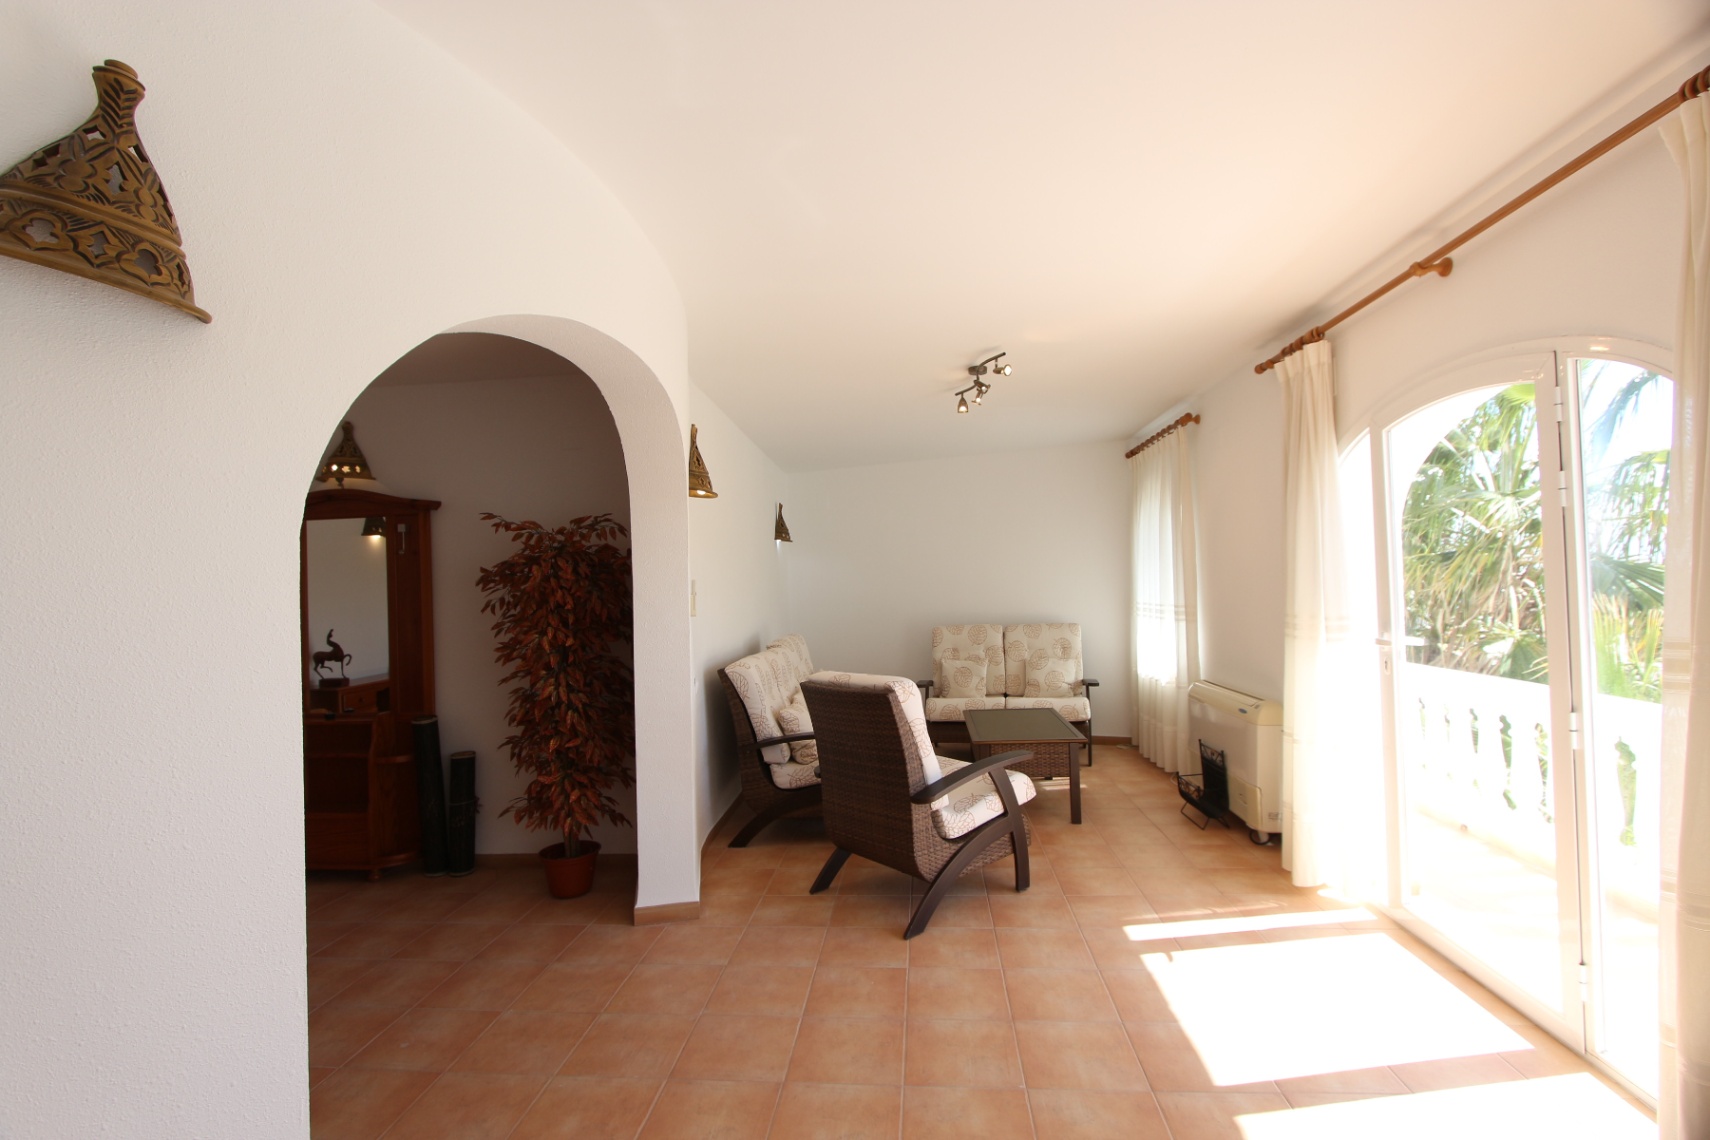 CHARMING 4-BEDROOM MEDITERRANEAN VILLA FOR SALE ON THE PICTURESQUE COAST OF BENISSA